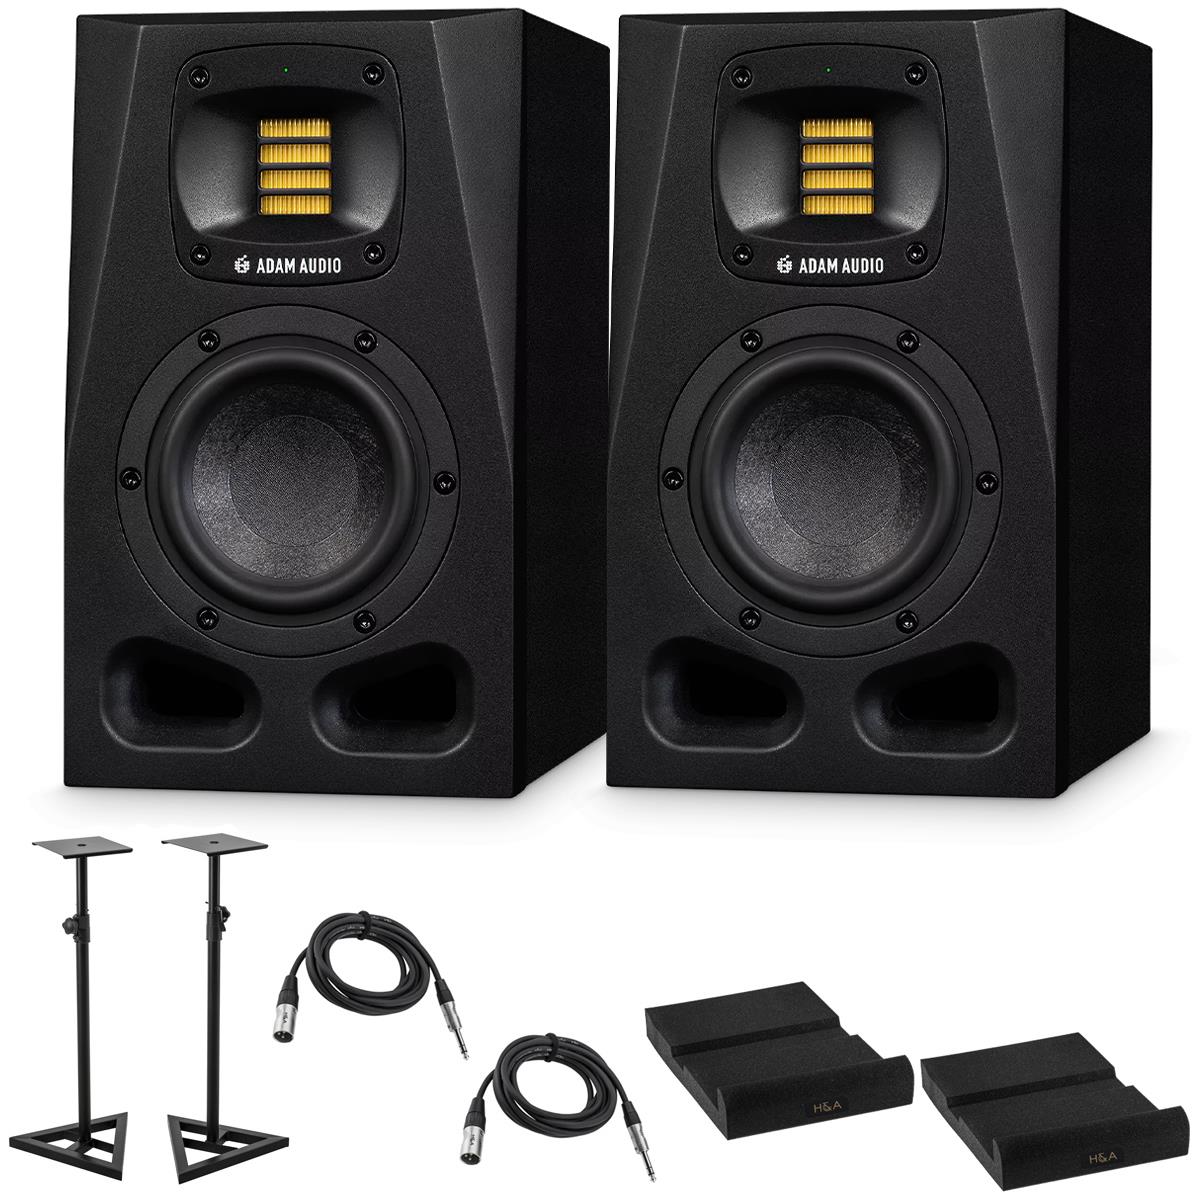 Photos - Speakers Adam Audio 2x A4V Vertical Active Studio Monitor with Accessories Kit 1210 